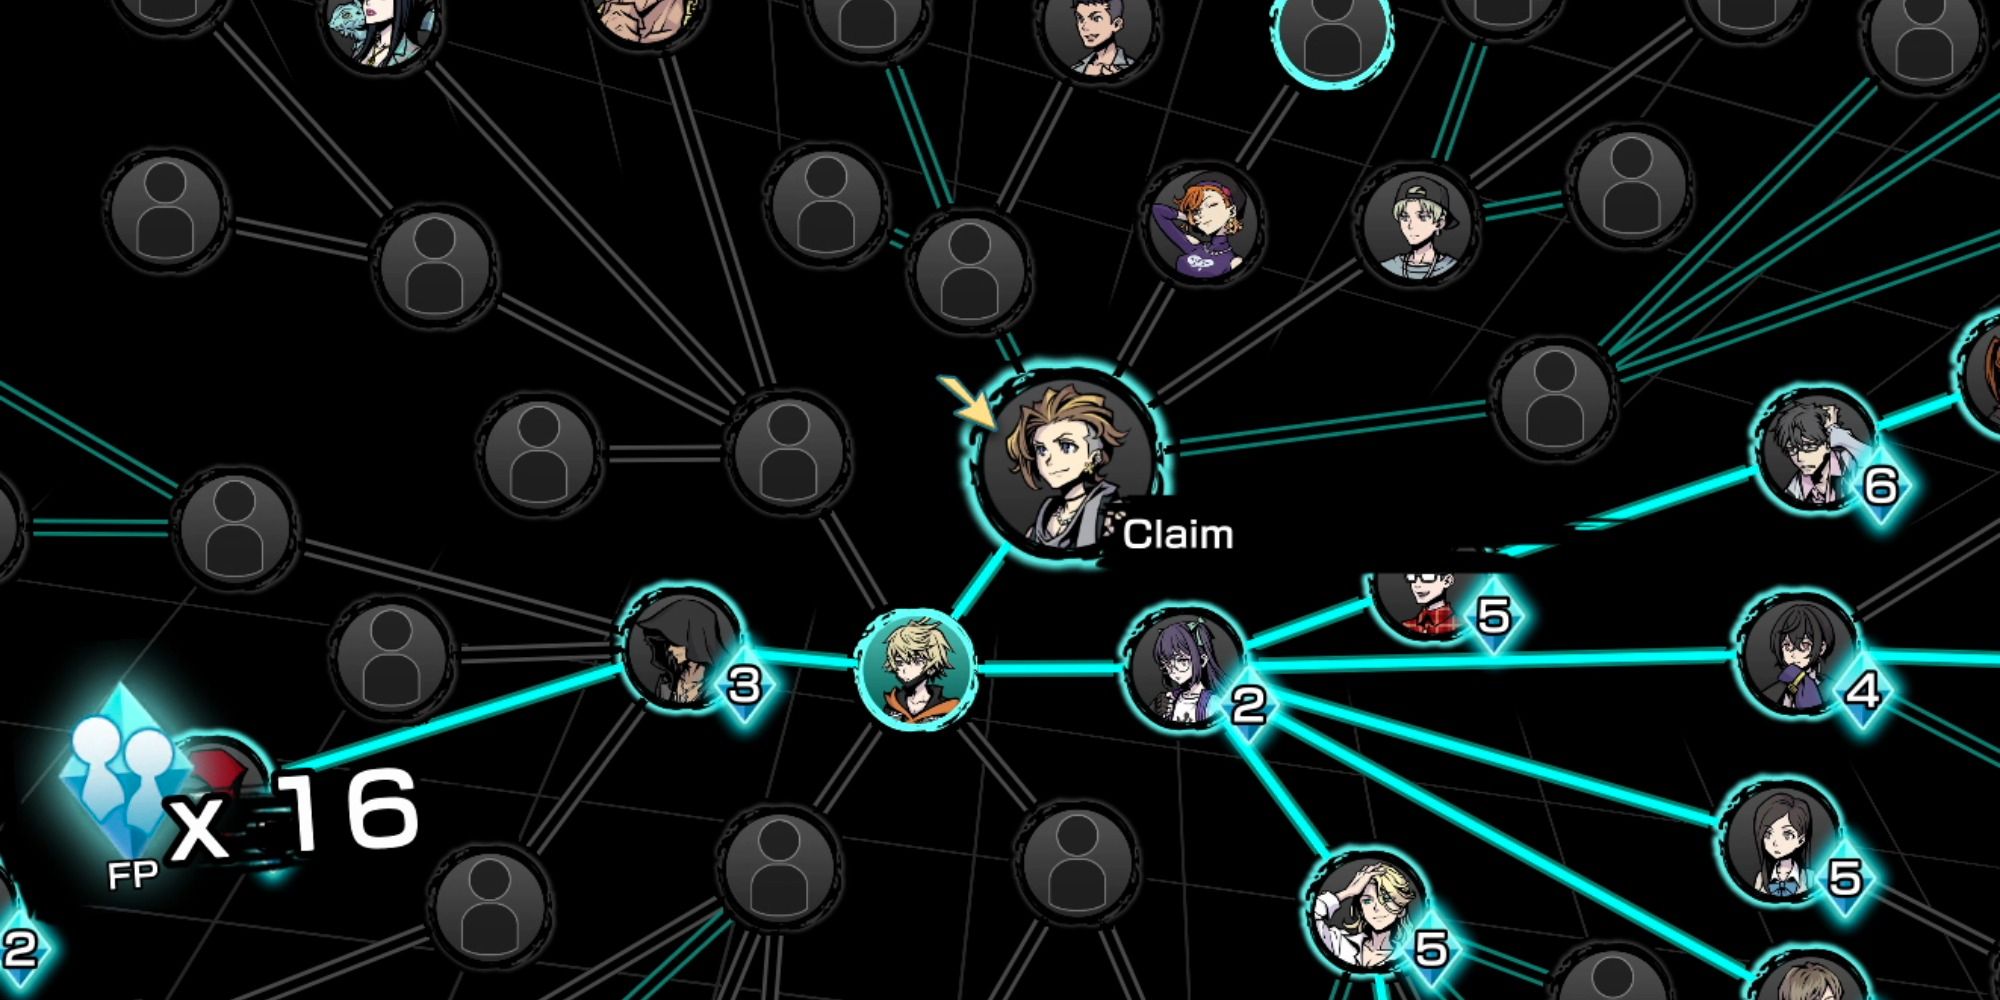 Neo The World Ends With You Social Network Overview